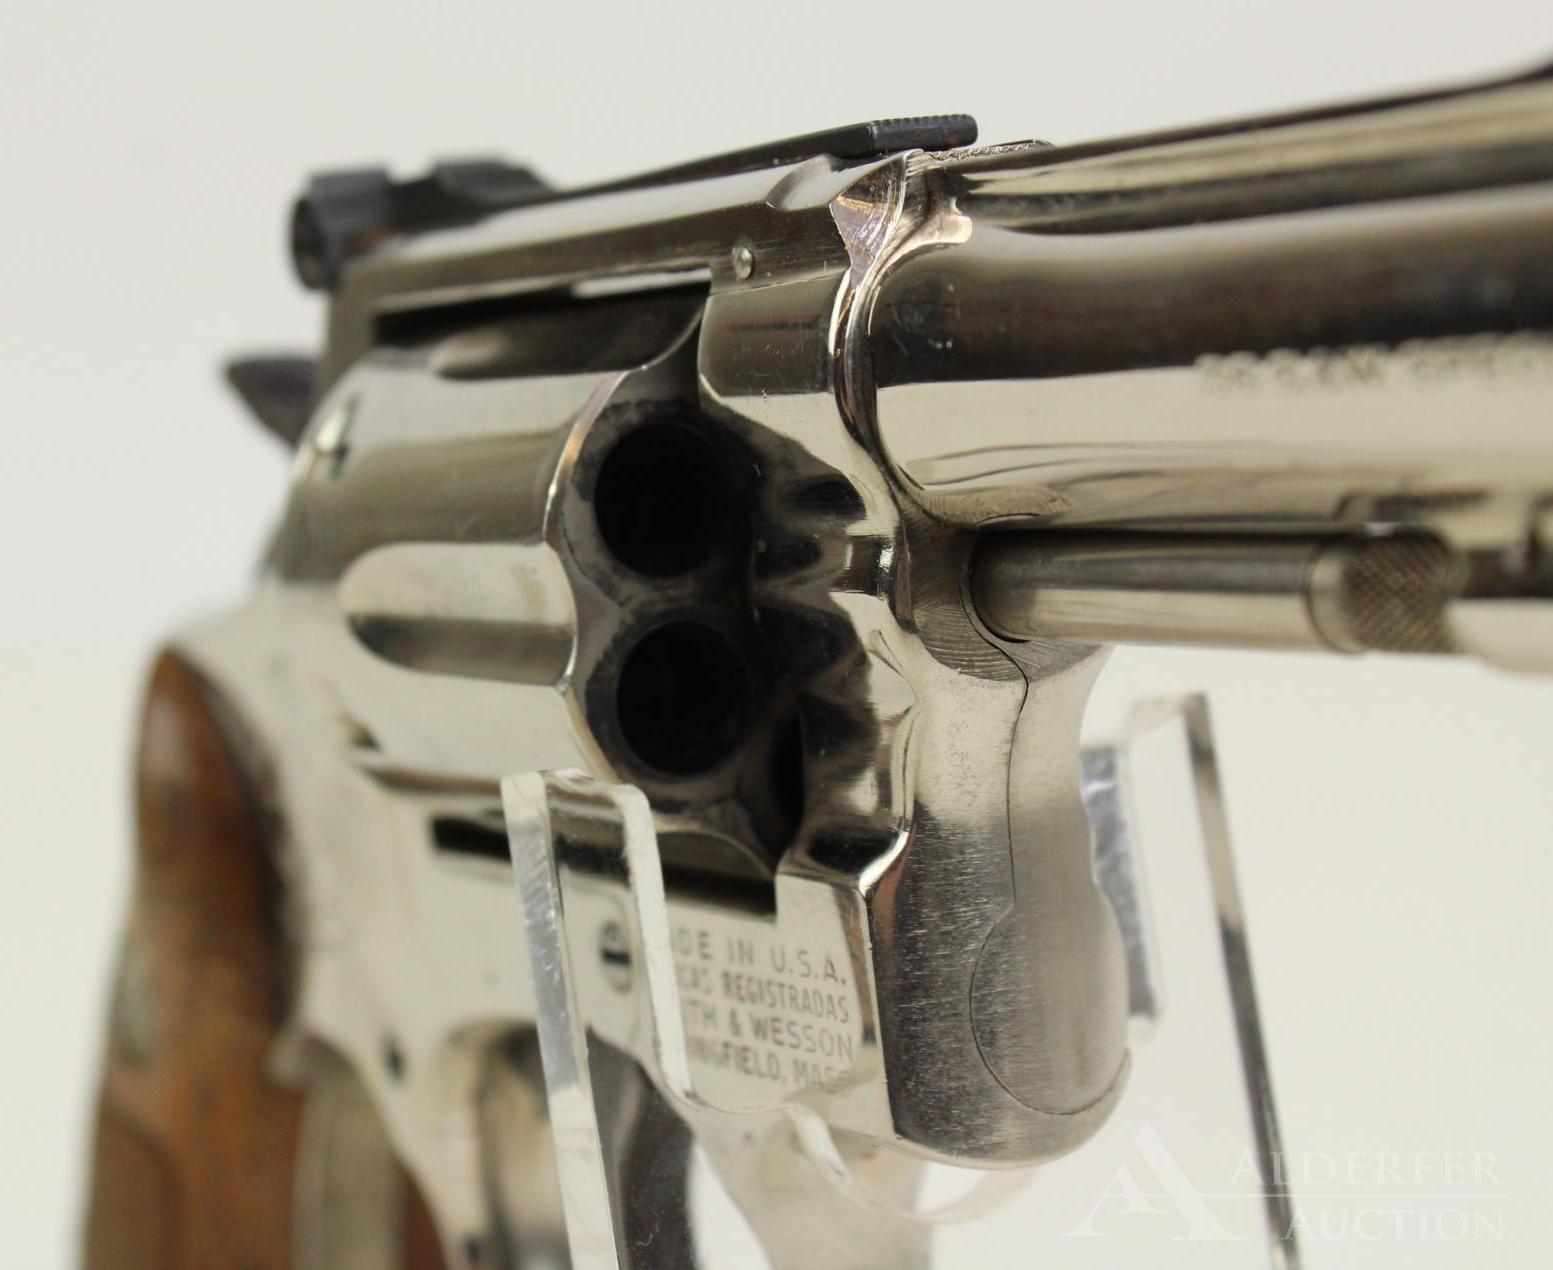 Smith & Wesson 15-3 double action revolver.